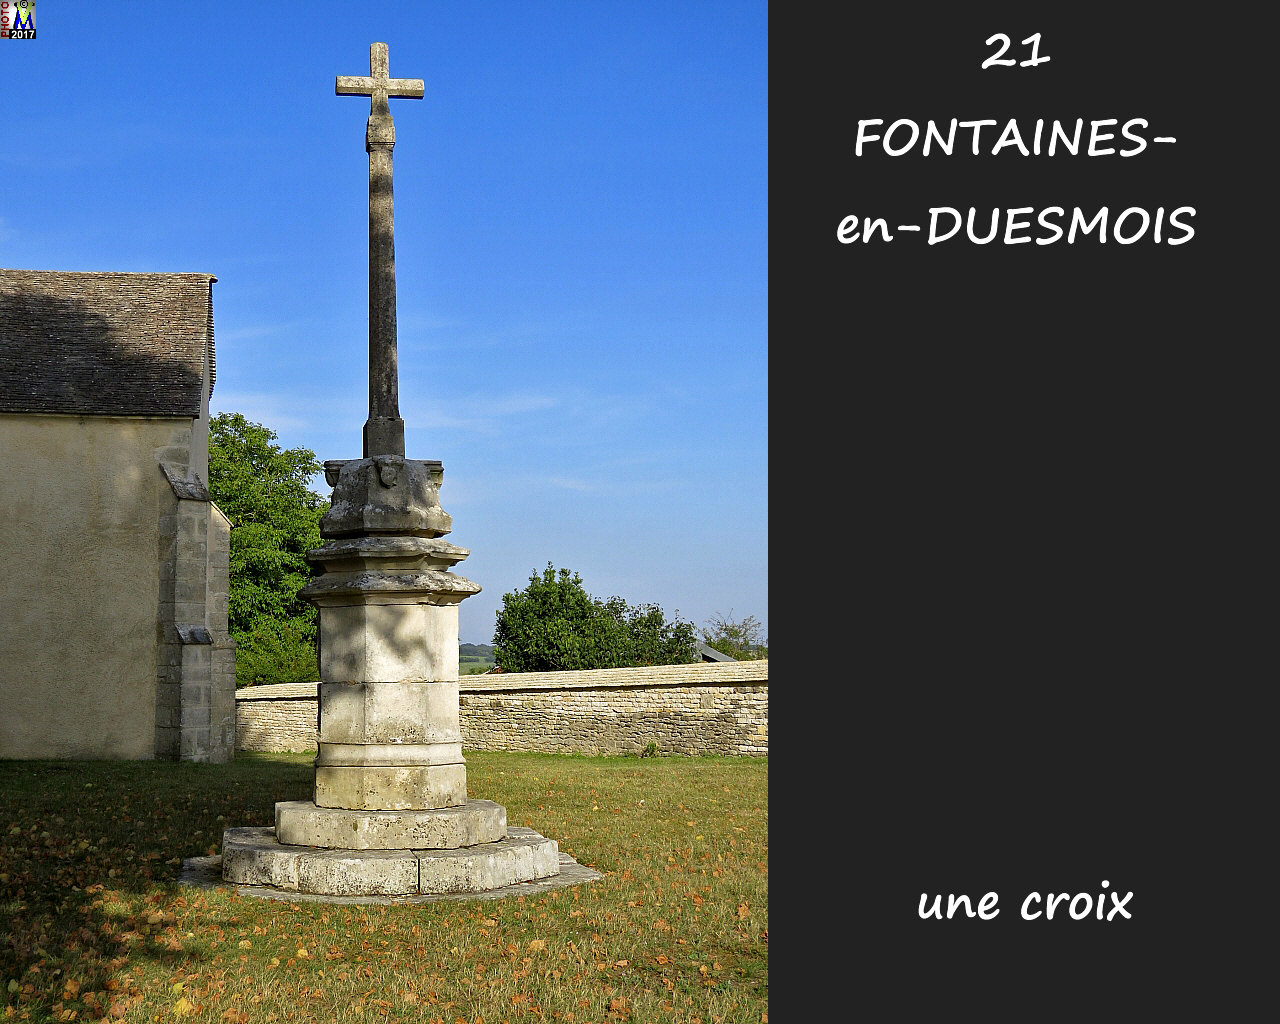 21FONTAINES-DUESMOIS_croix_100.jpg